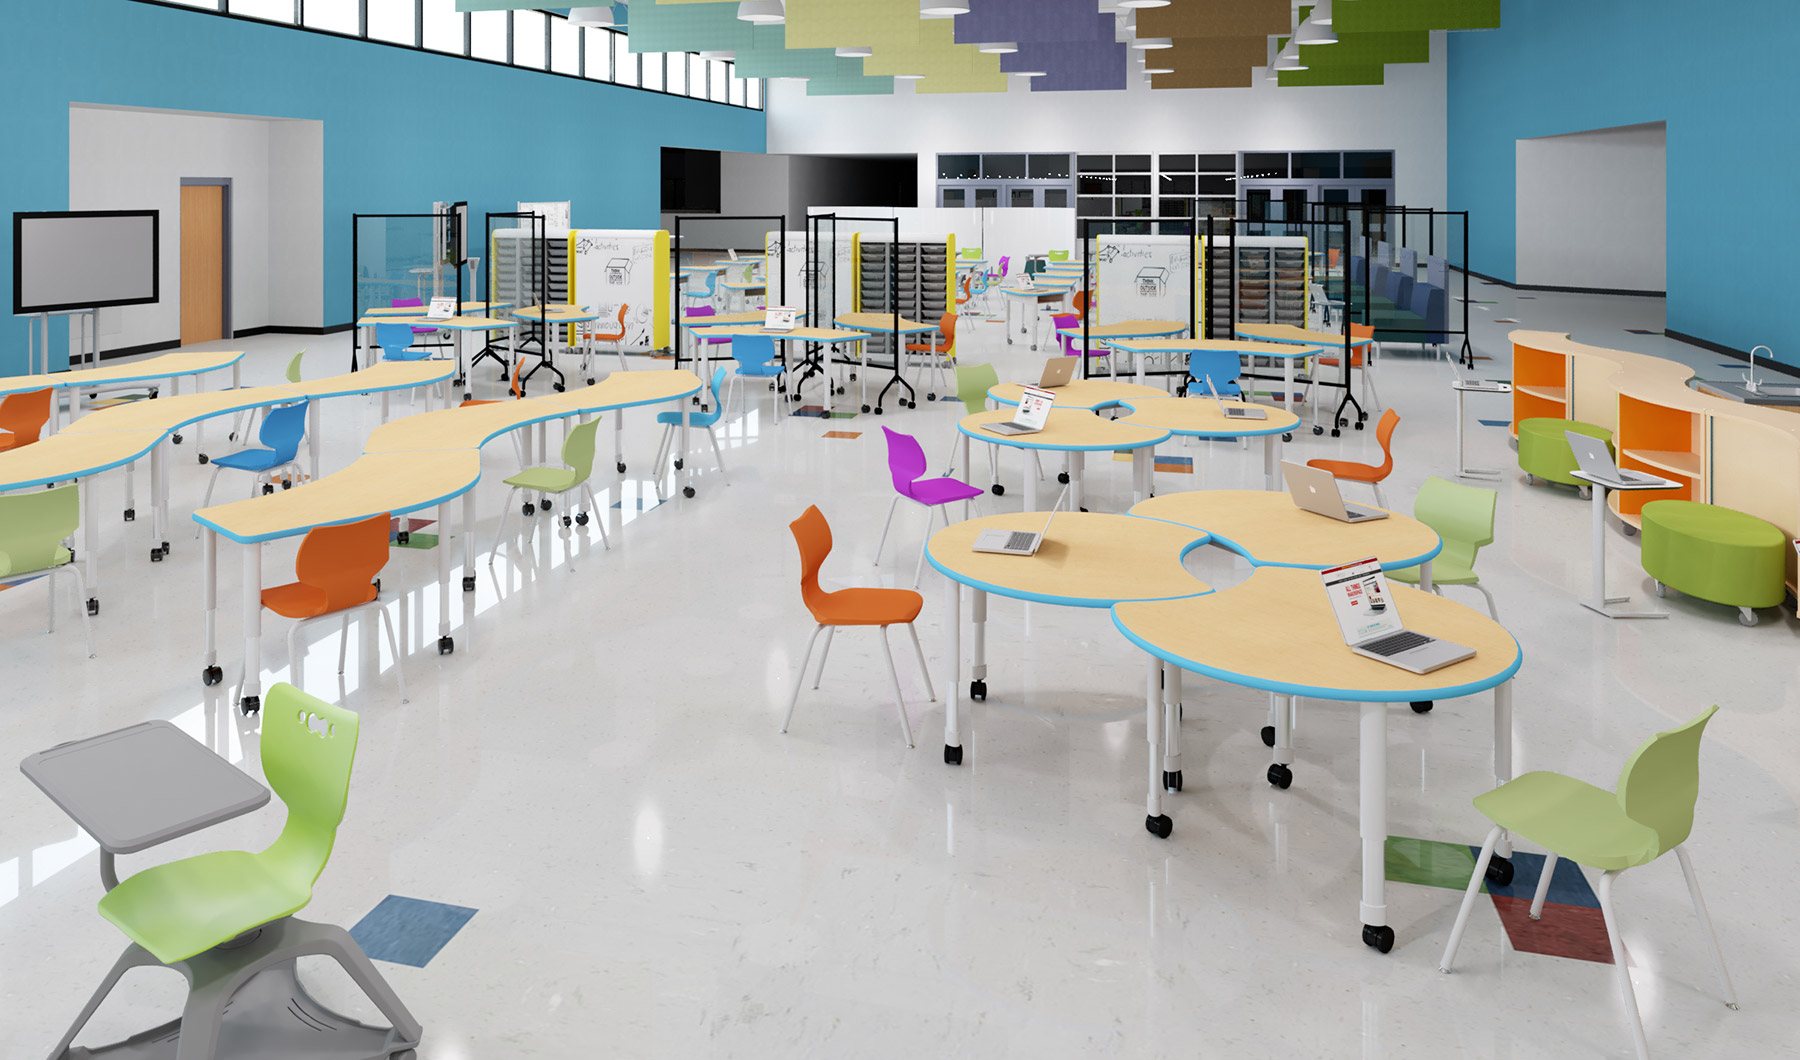 School Spaces Designed for Social Distancing - Cafeteria